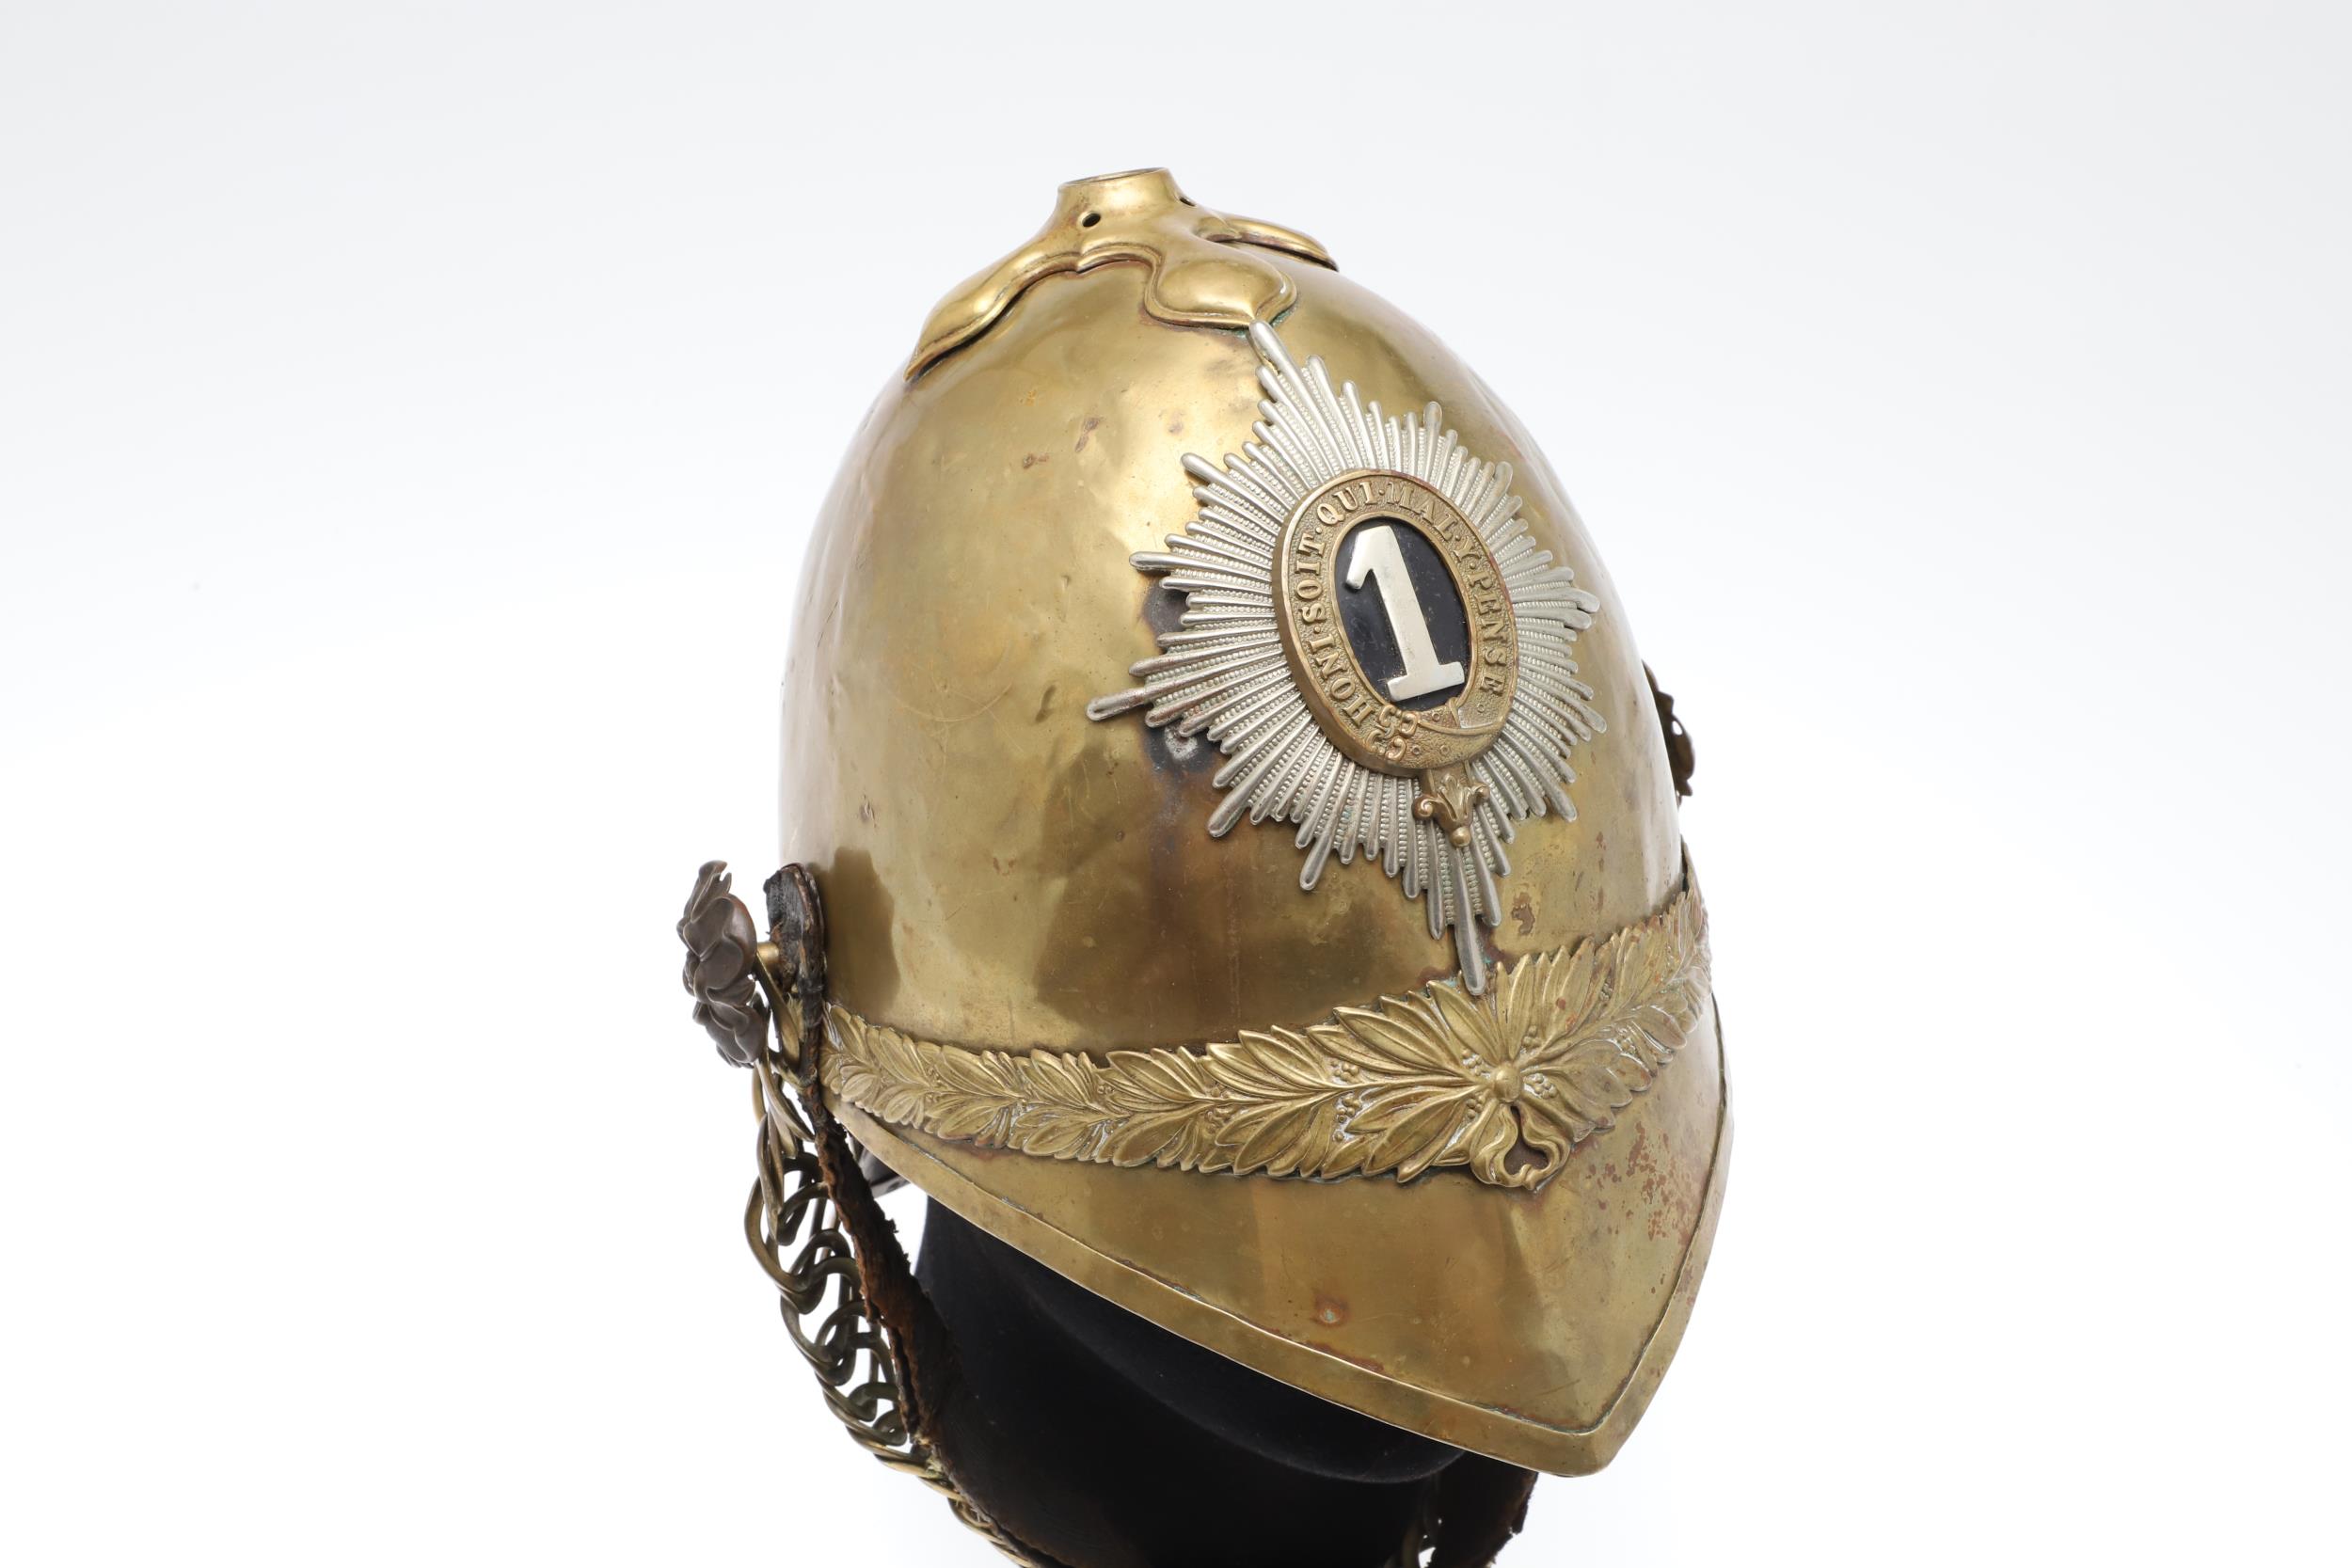 A 1ST DRAGOON GUARDS 1871 PATTERN HELMET. - Image 2 of 15